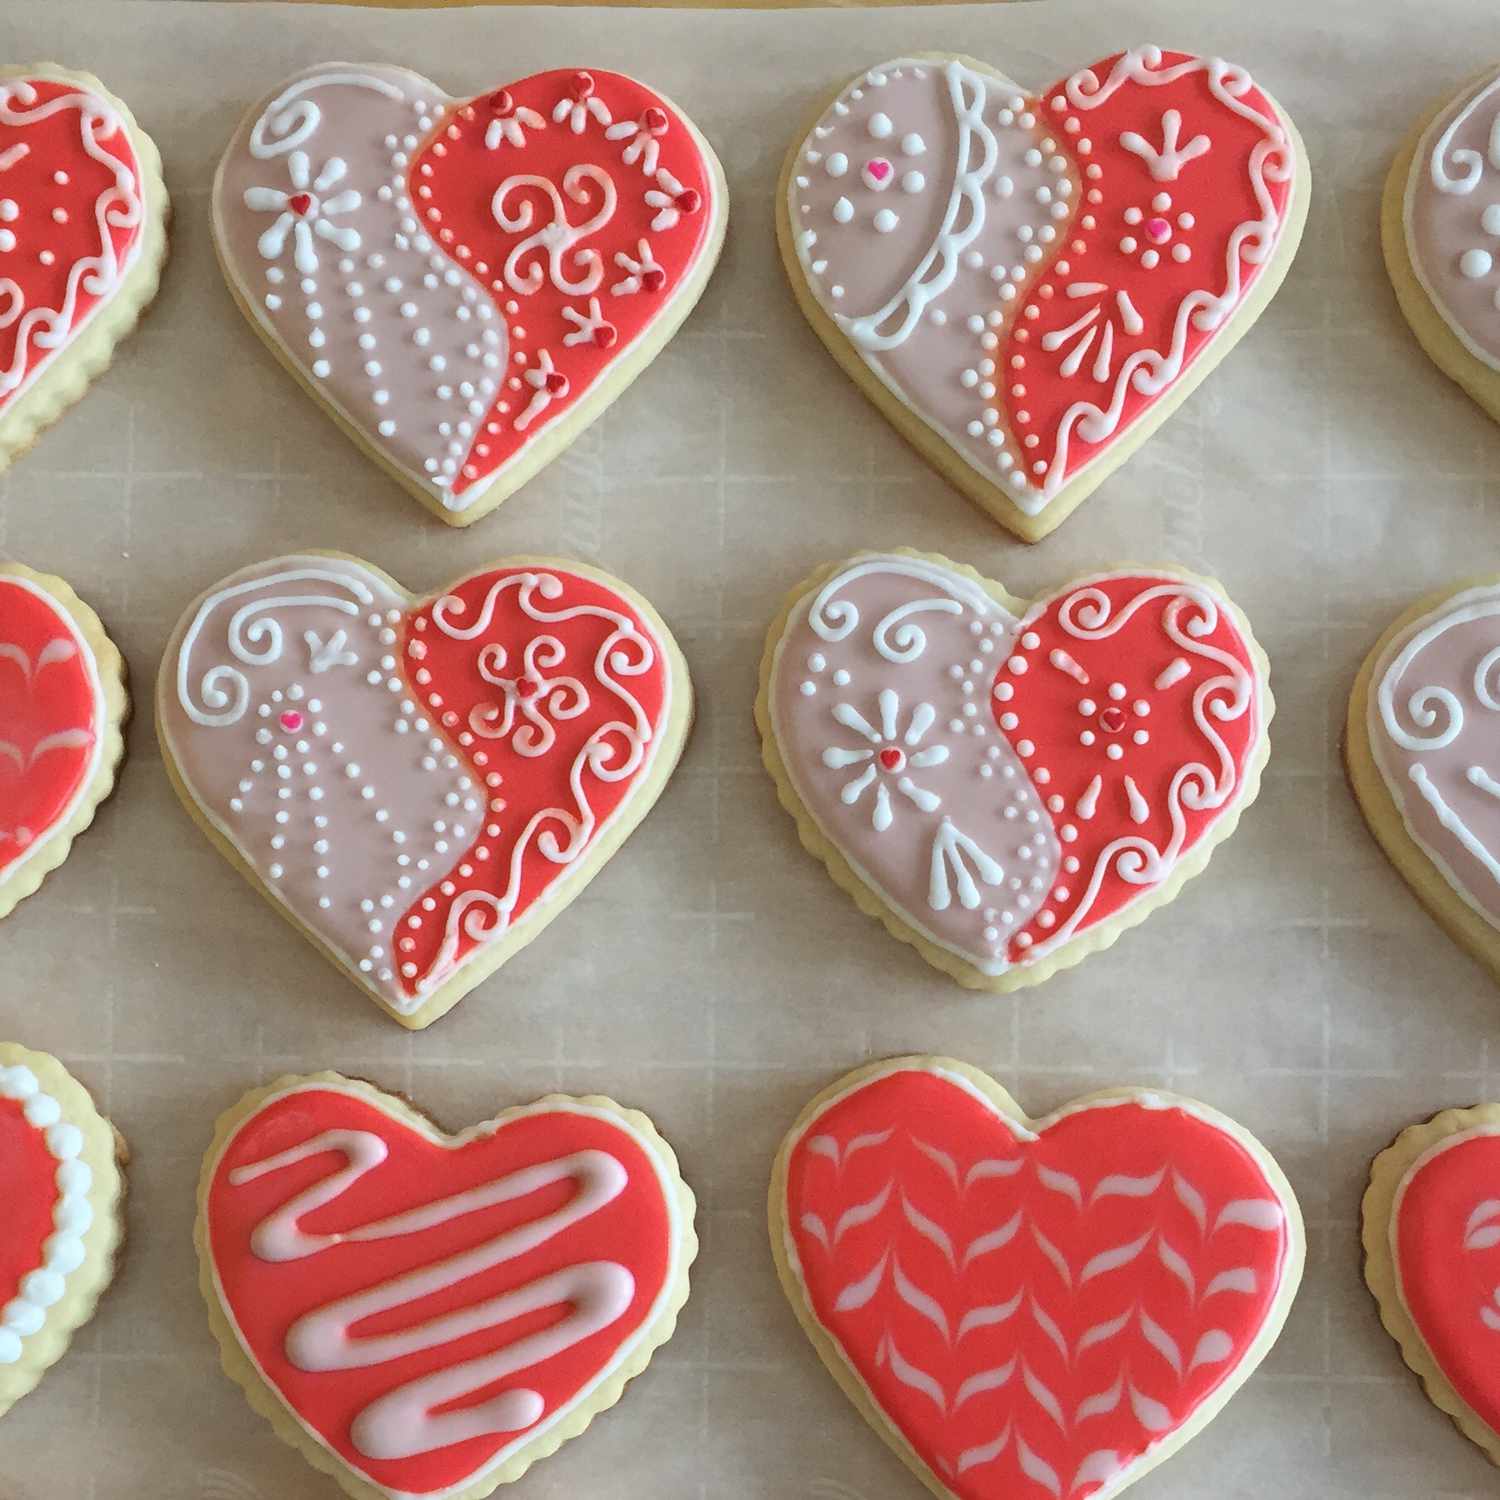 Valentine heart-shaped cookies decorated with white and red icing and intricate piped designs